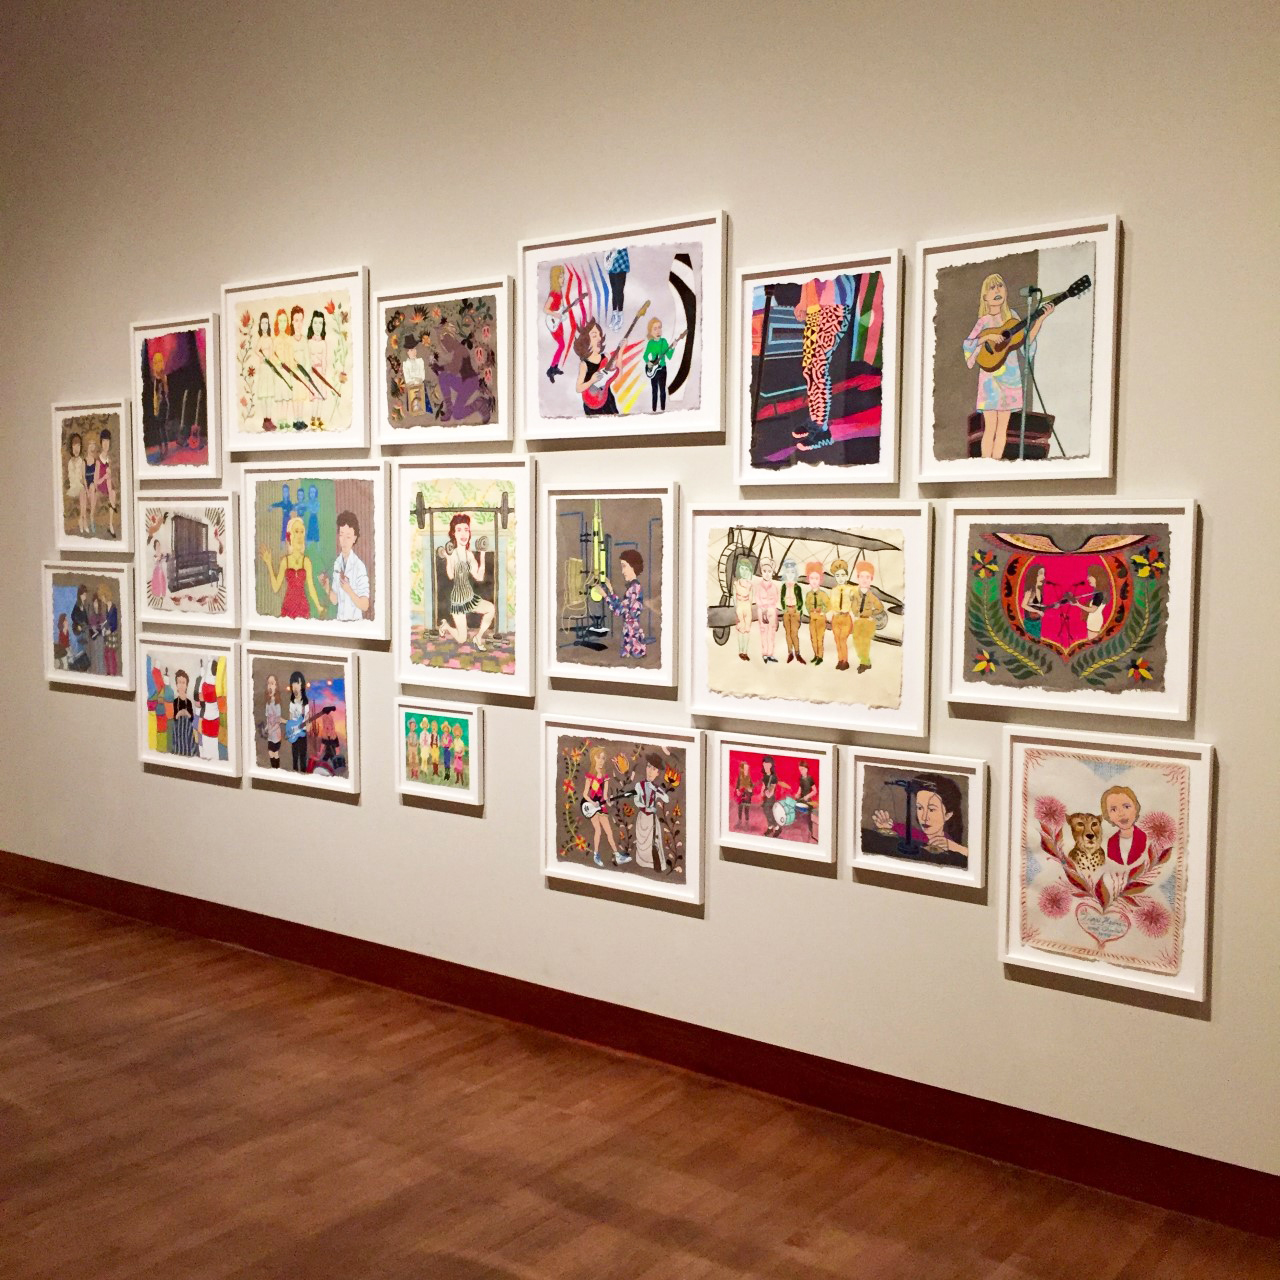   21 Works on Paper  2016 Faculty Quadrennial Exhibition  Chazen Museum  Madison, WI    